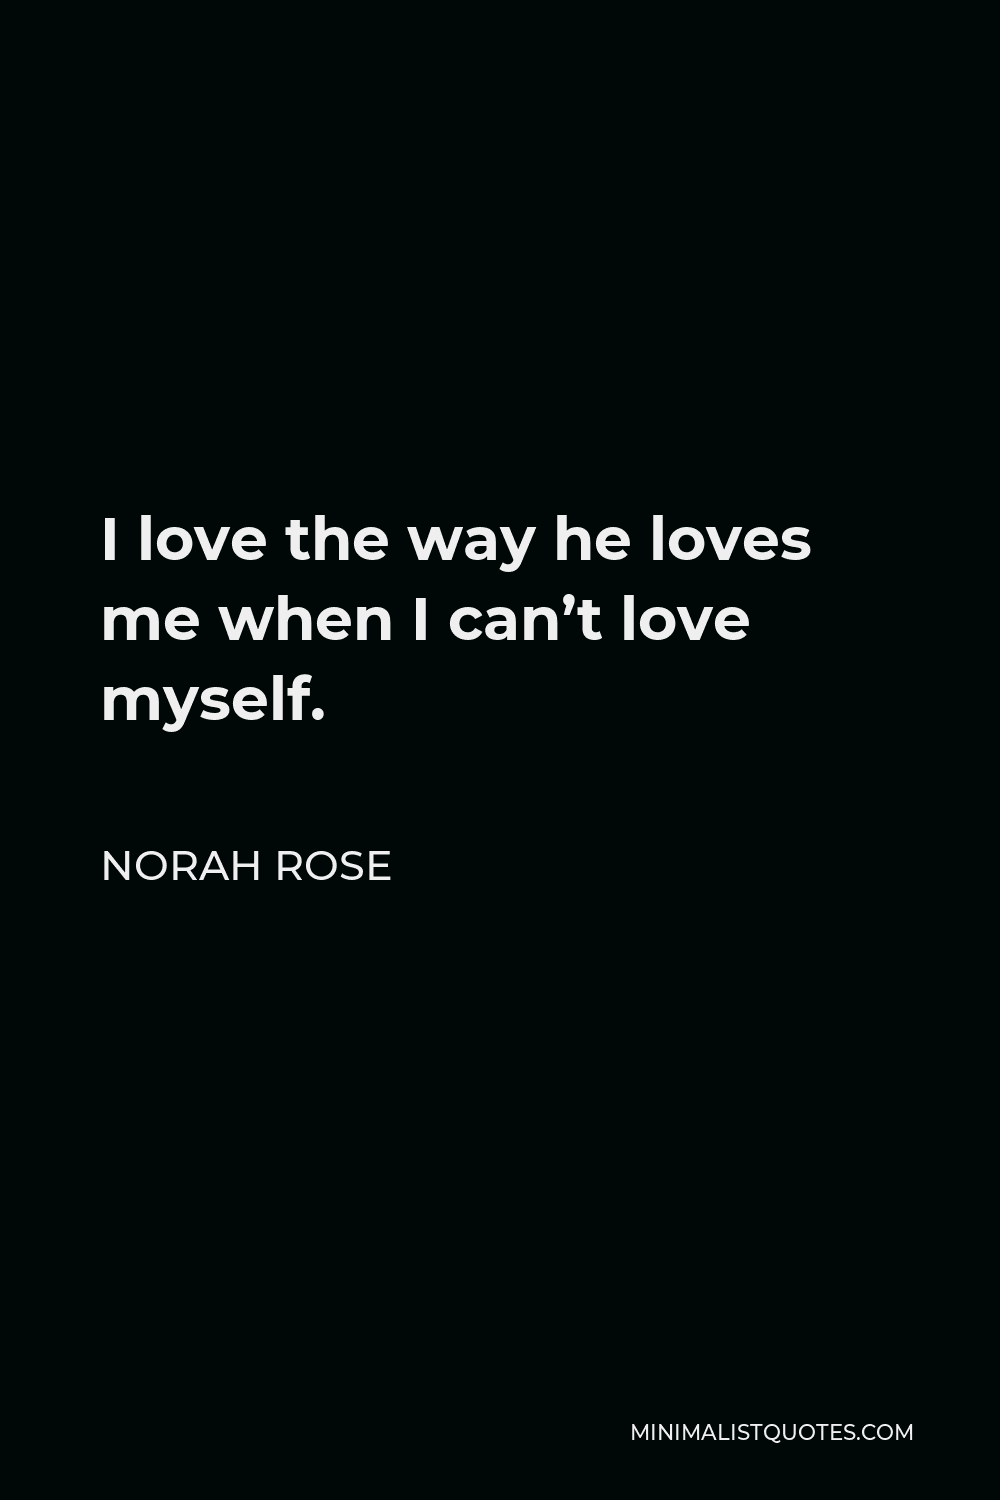 Norah Rose Quote - I love the way he loves me when I can’t love myself.